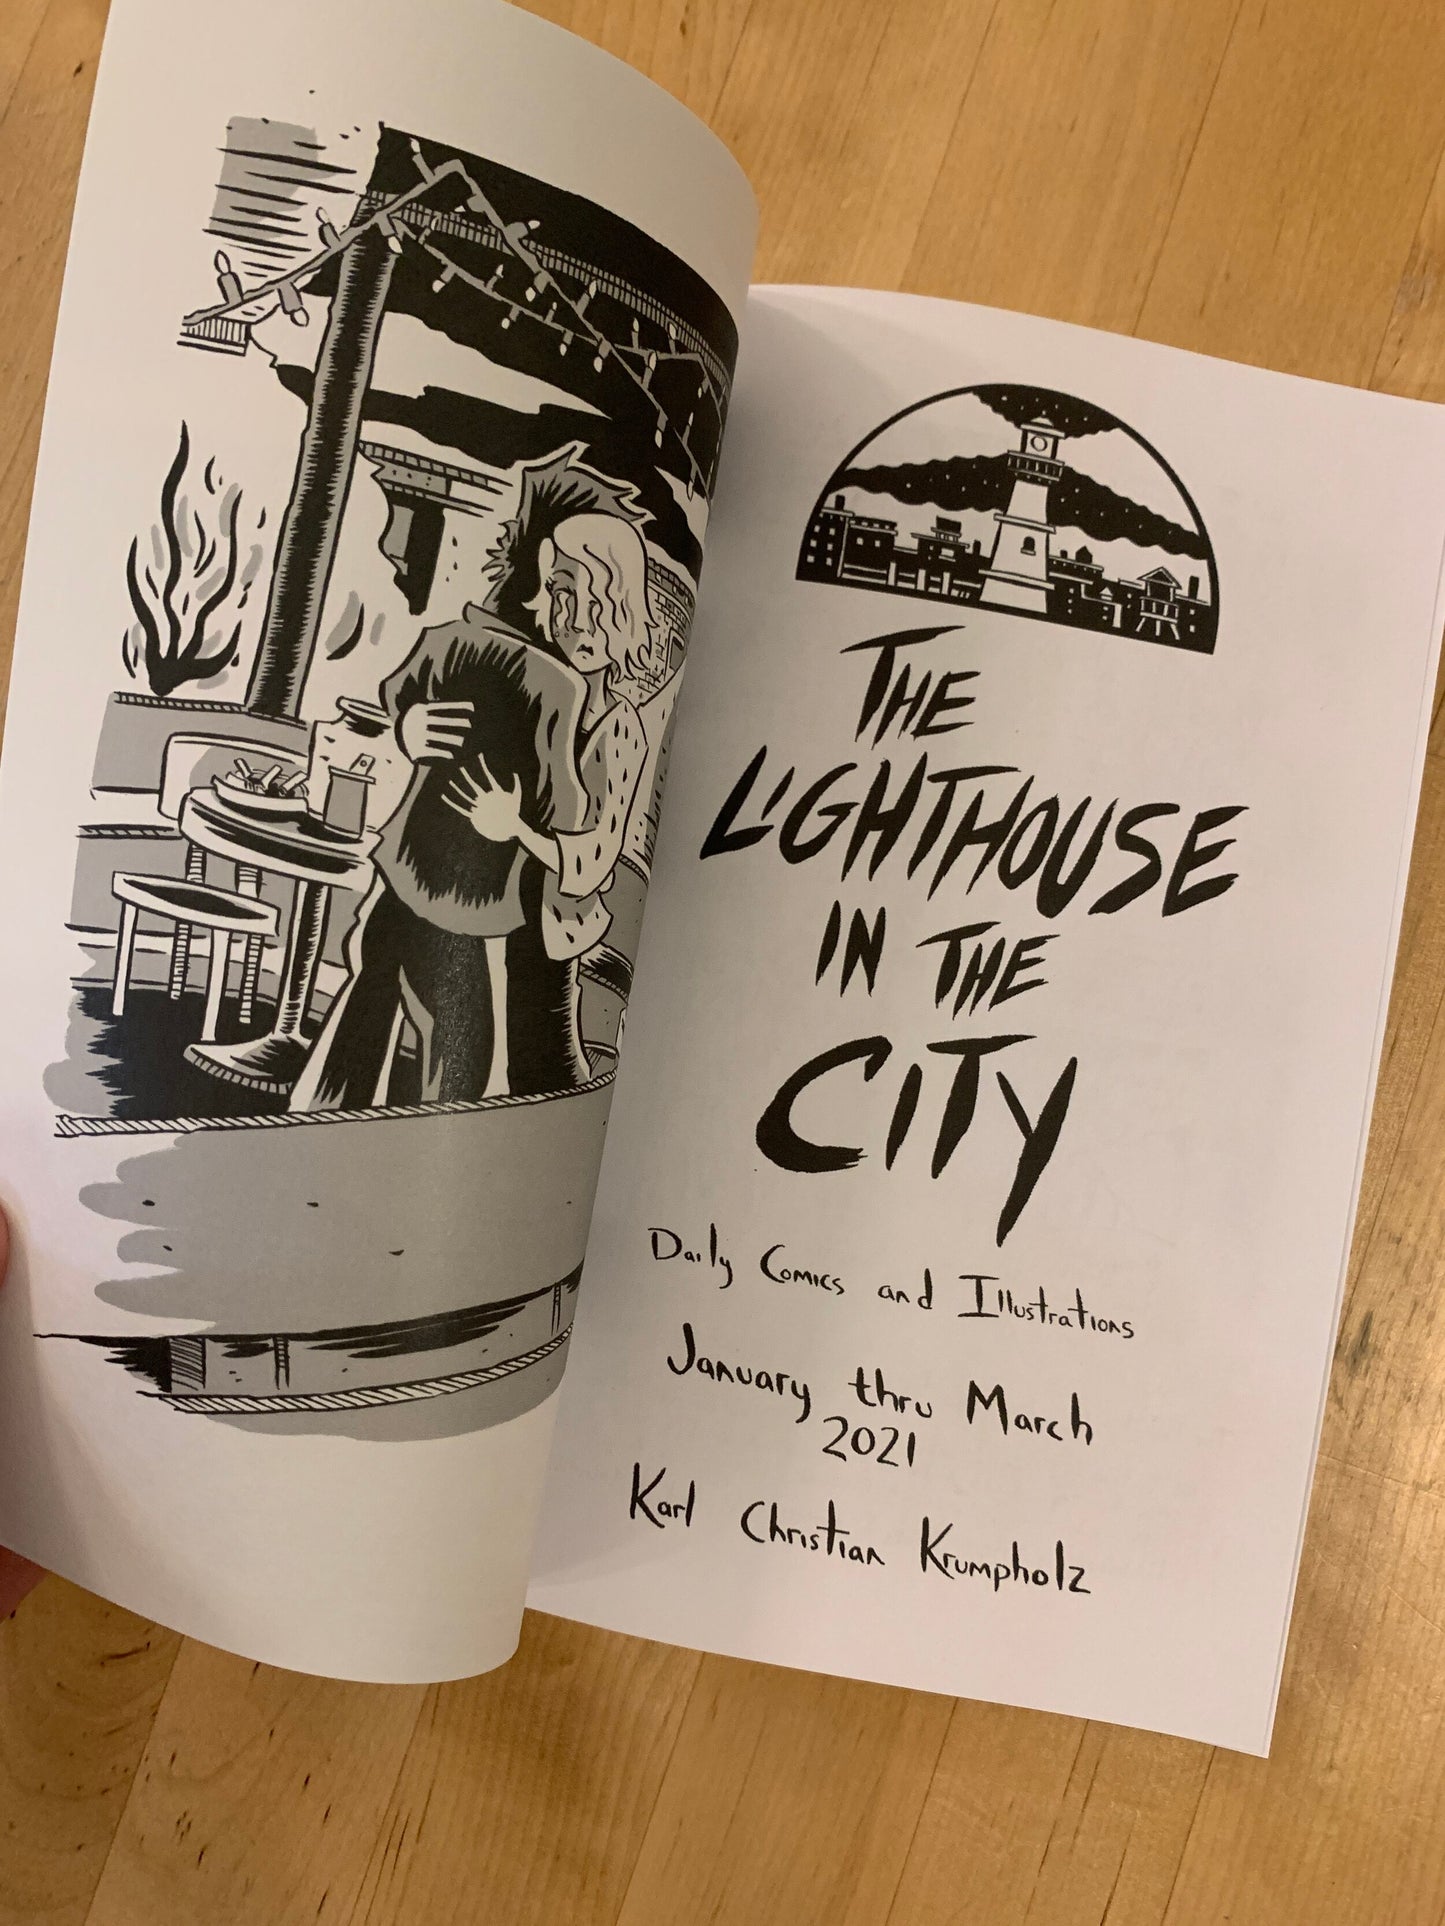 The Lighthouse in the City, Vol. 5